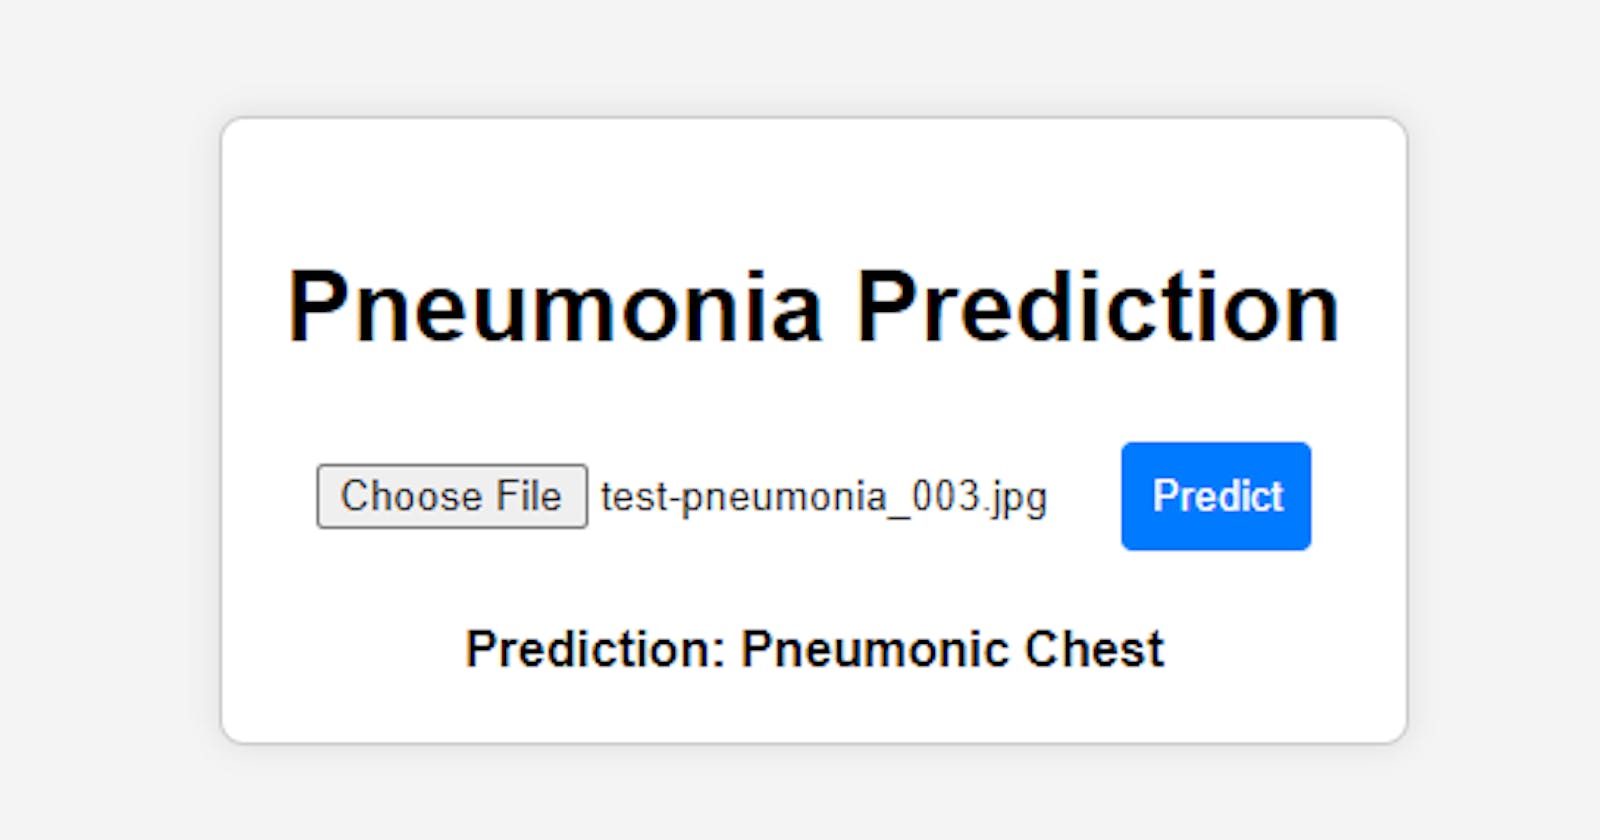 Predicting Pneumonia from Chest X-rays using Deep Learning, Computer Vision, and Flask